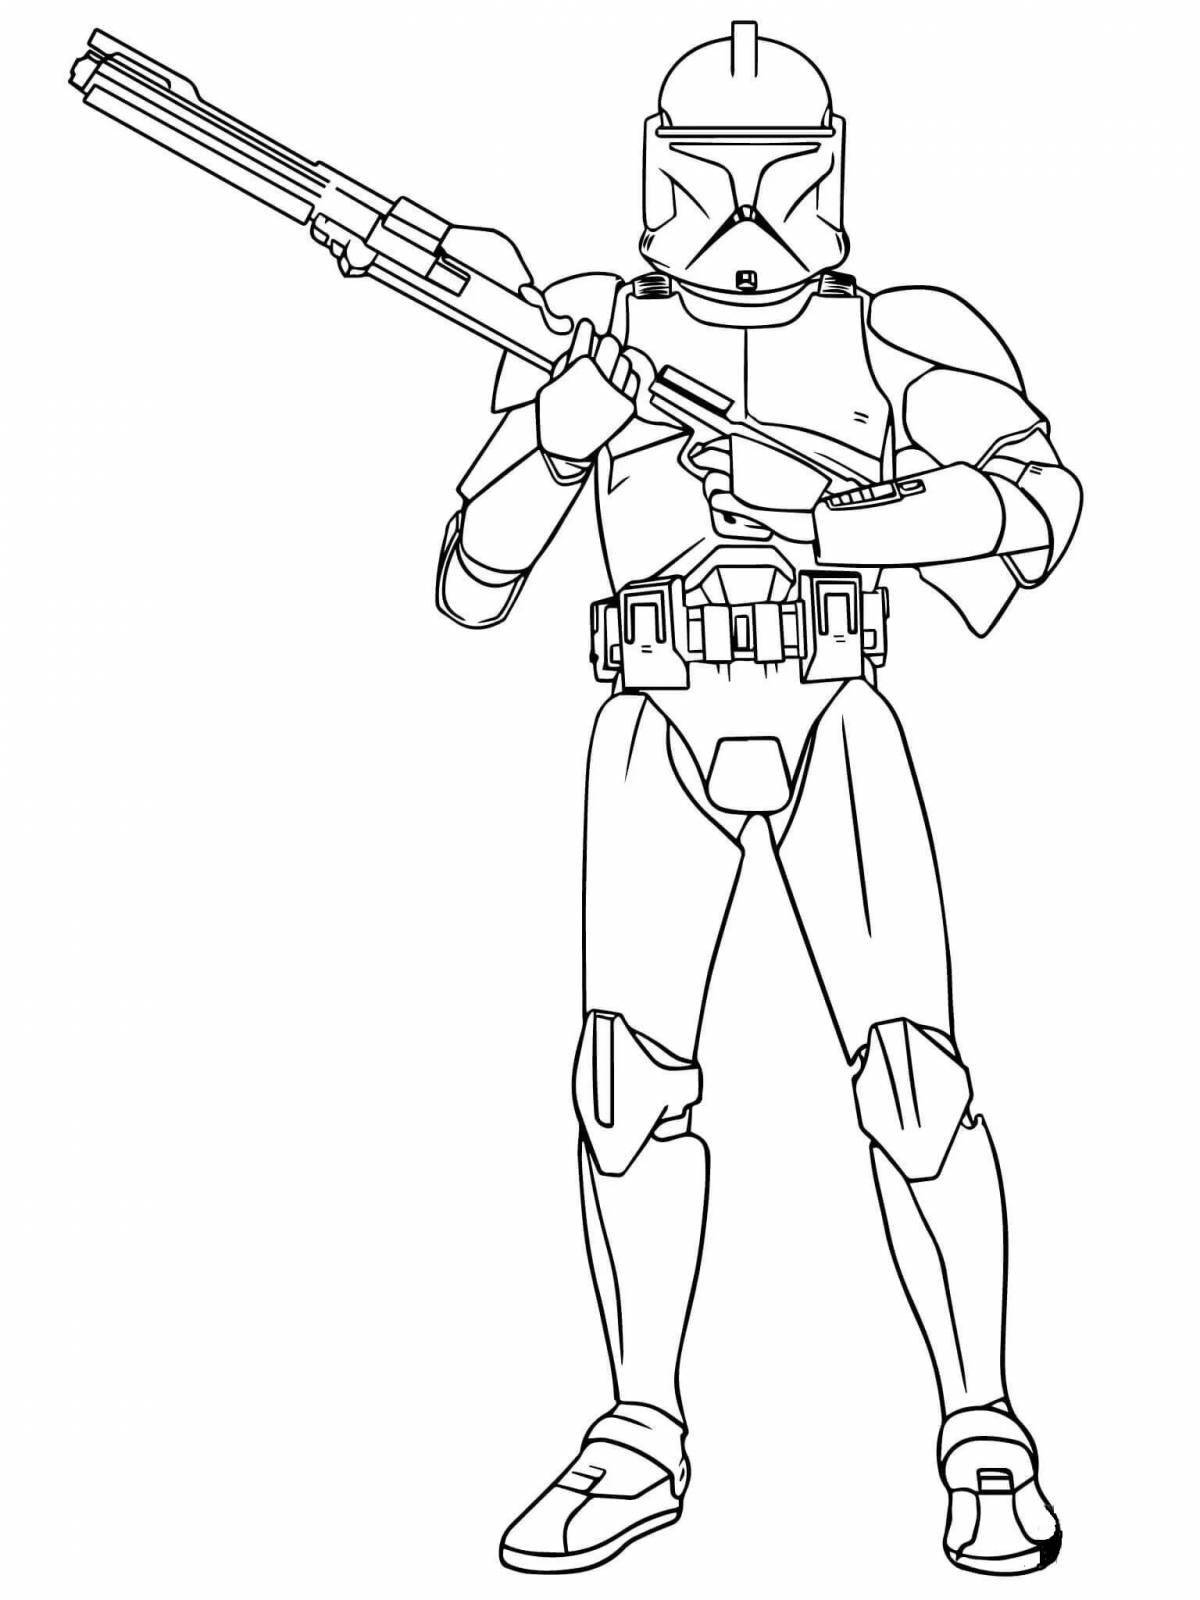 Radiant coloring page star wars clones